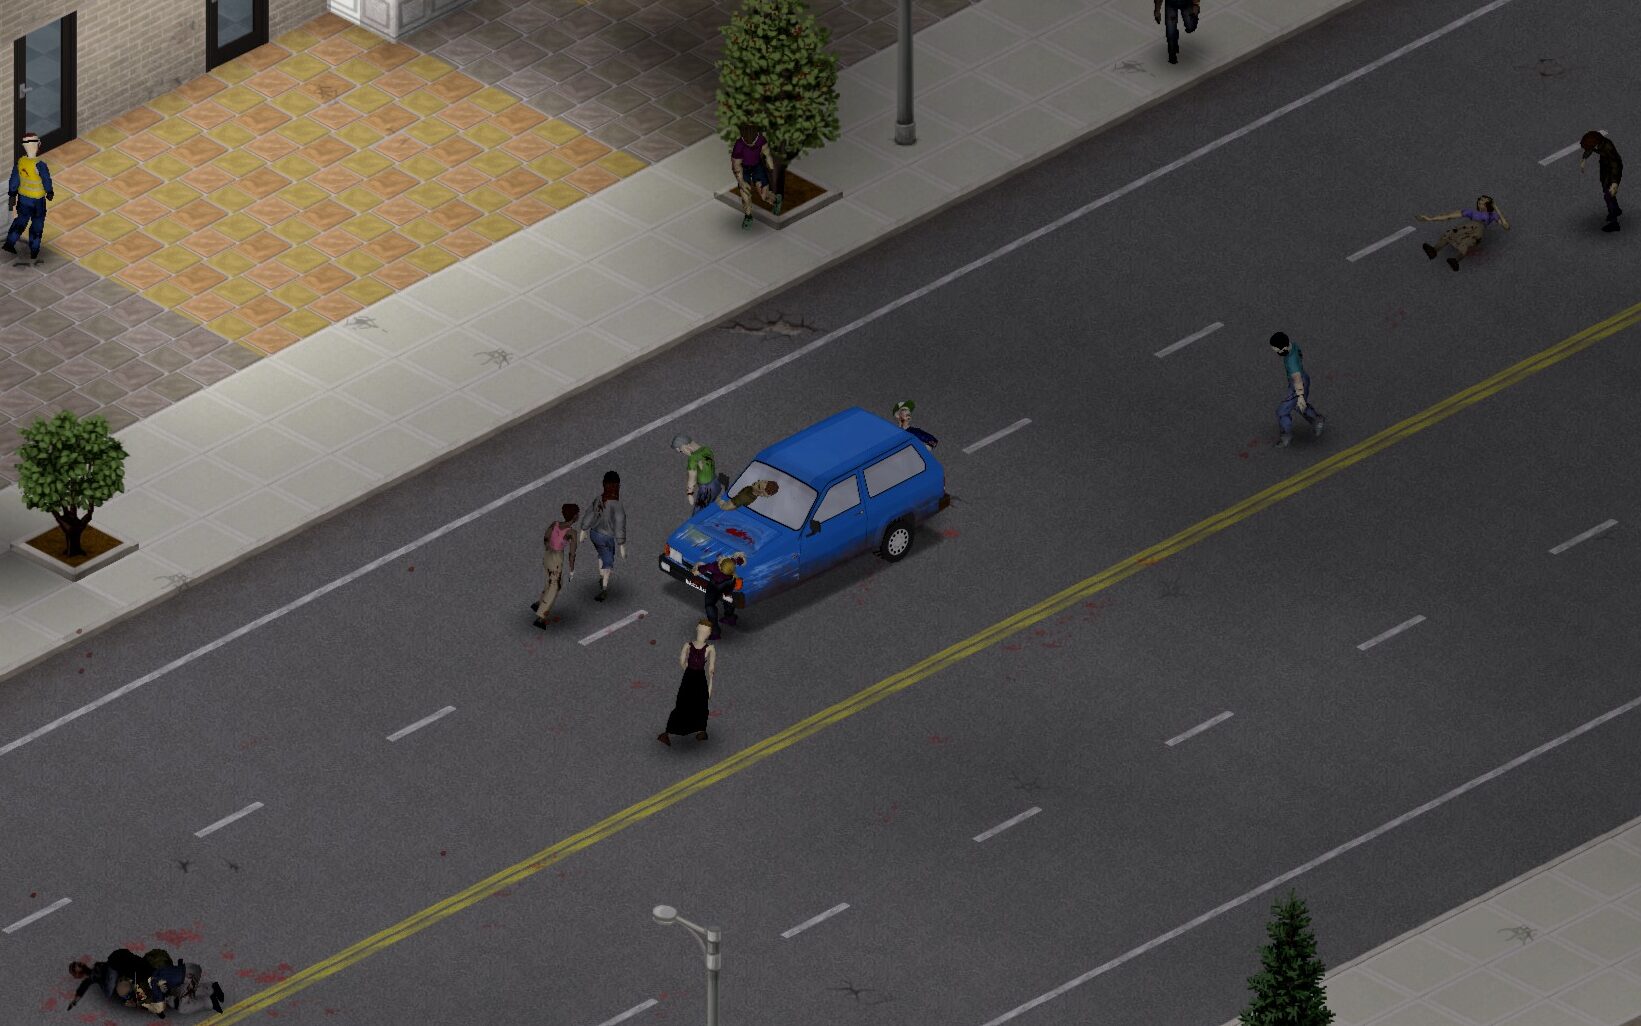 A blue Robin Reliant in a street with zombies around.